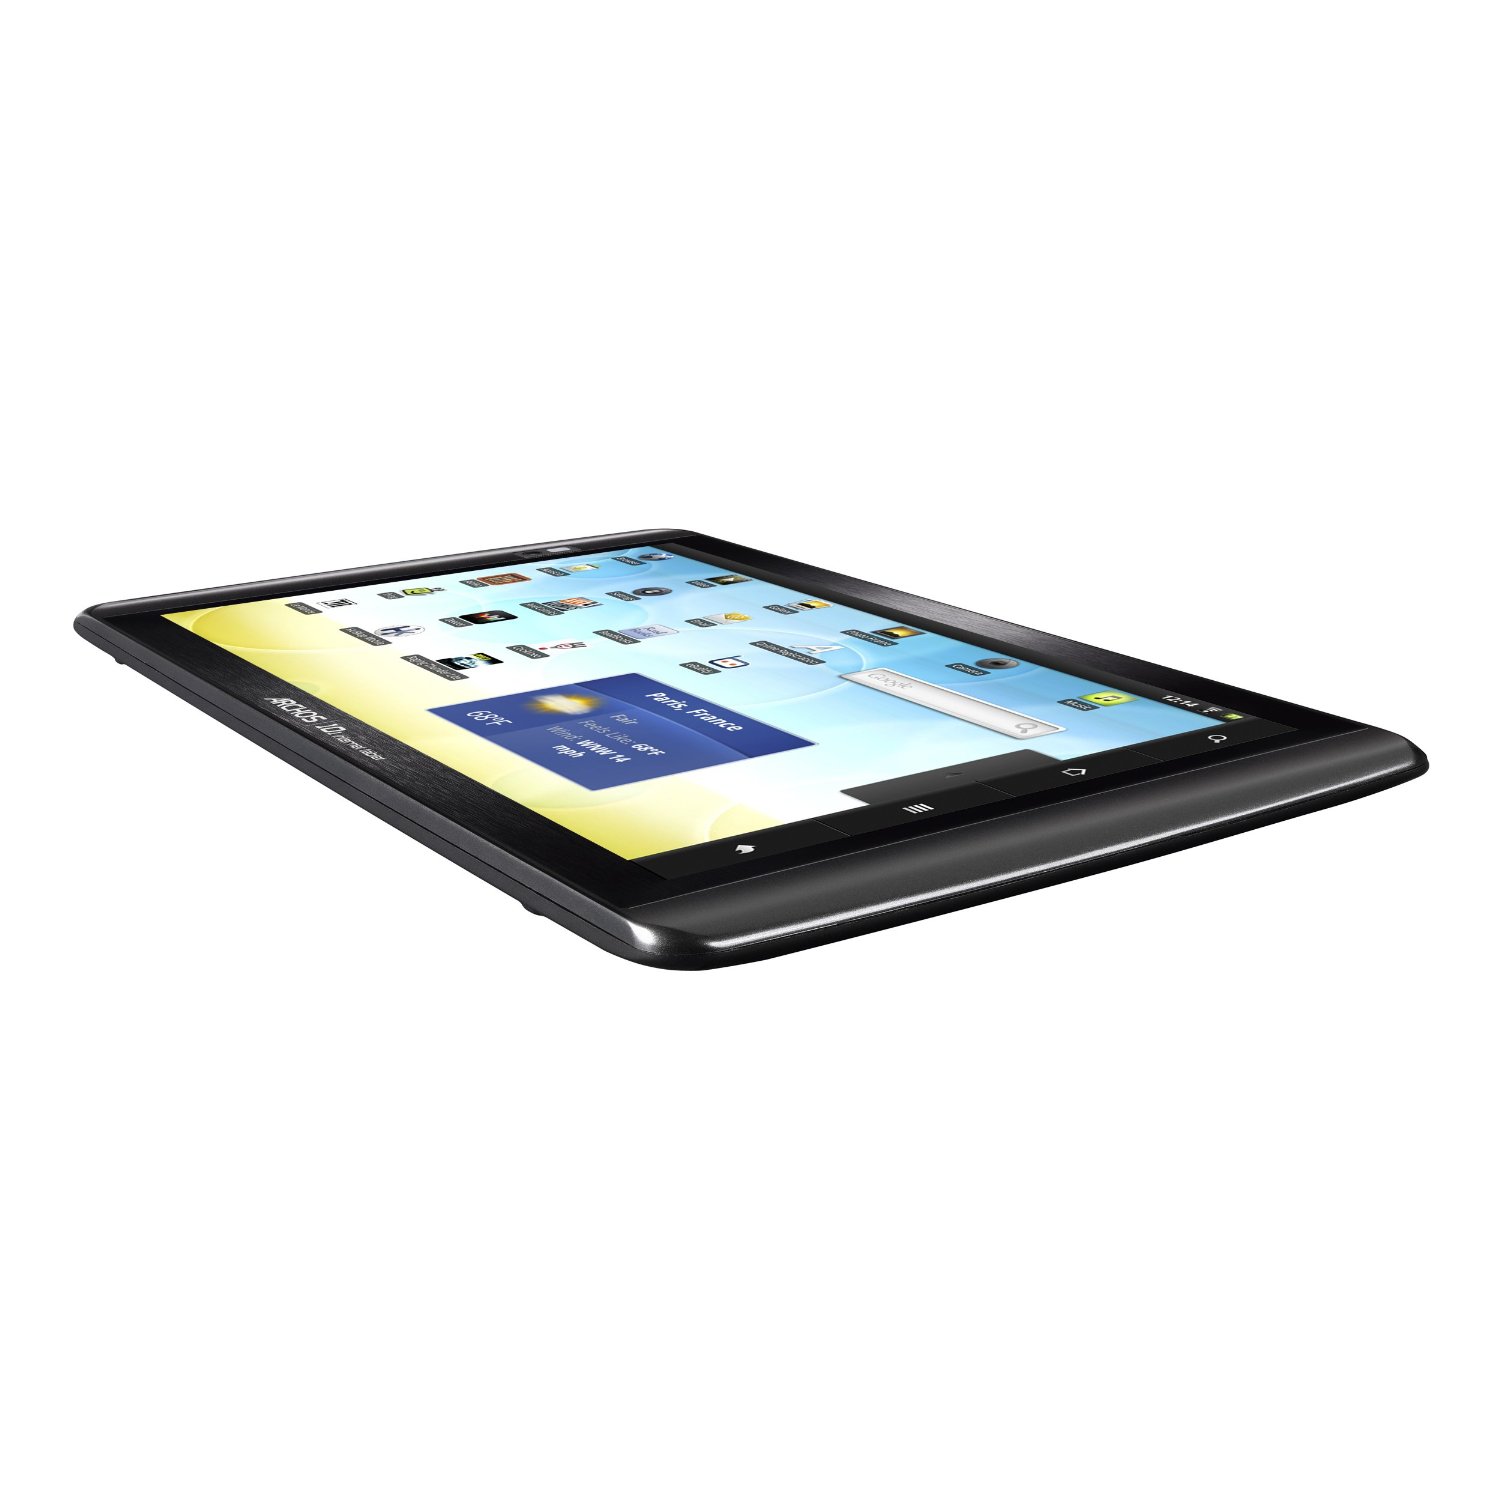 http://thetechjournal.com/wp-content/uploads/images/1110/1318017670-archos-101-android-powered-internet-tablet-3.jpg